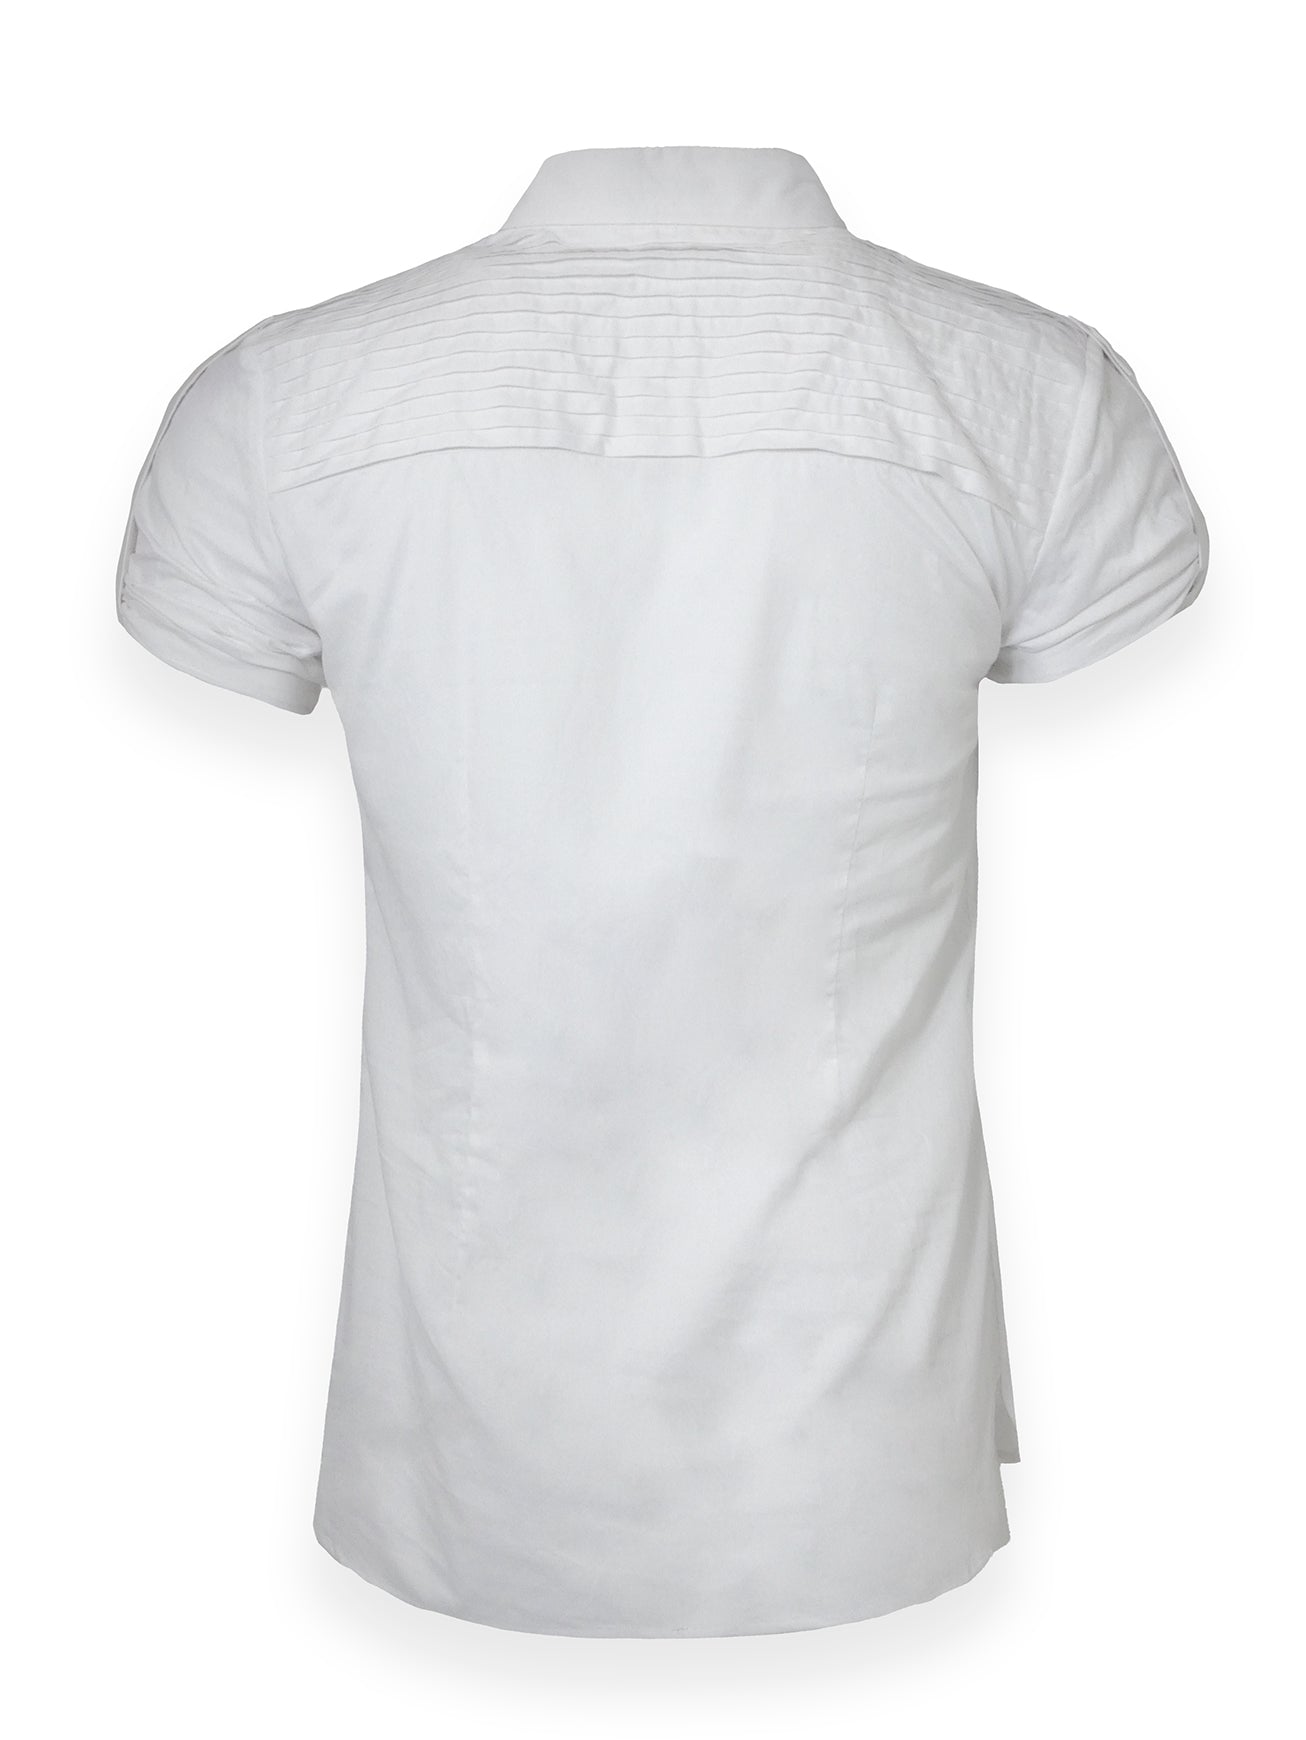 White Formal Shirt with Button Up Sleeves